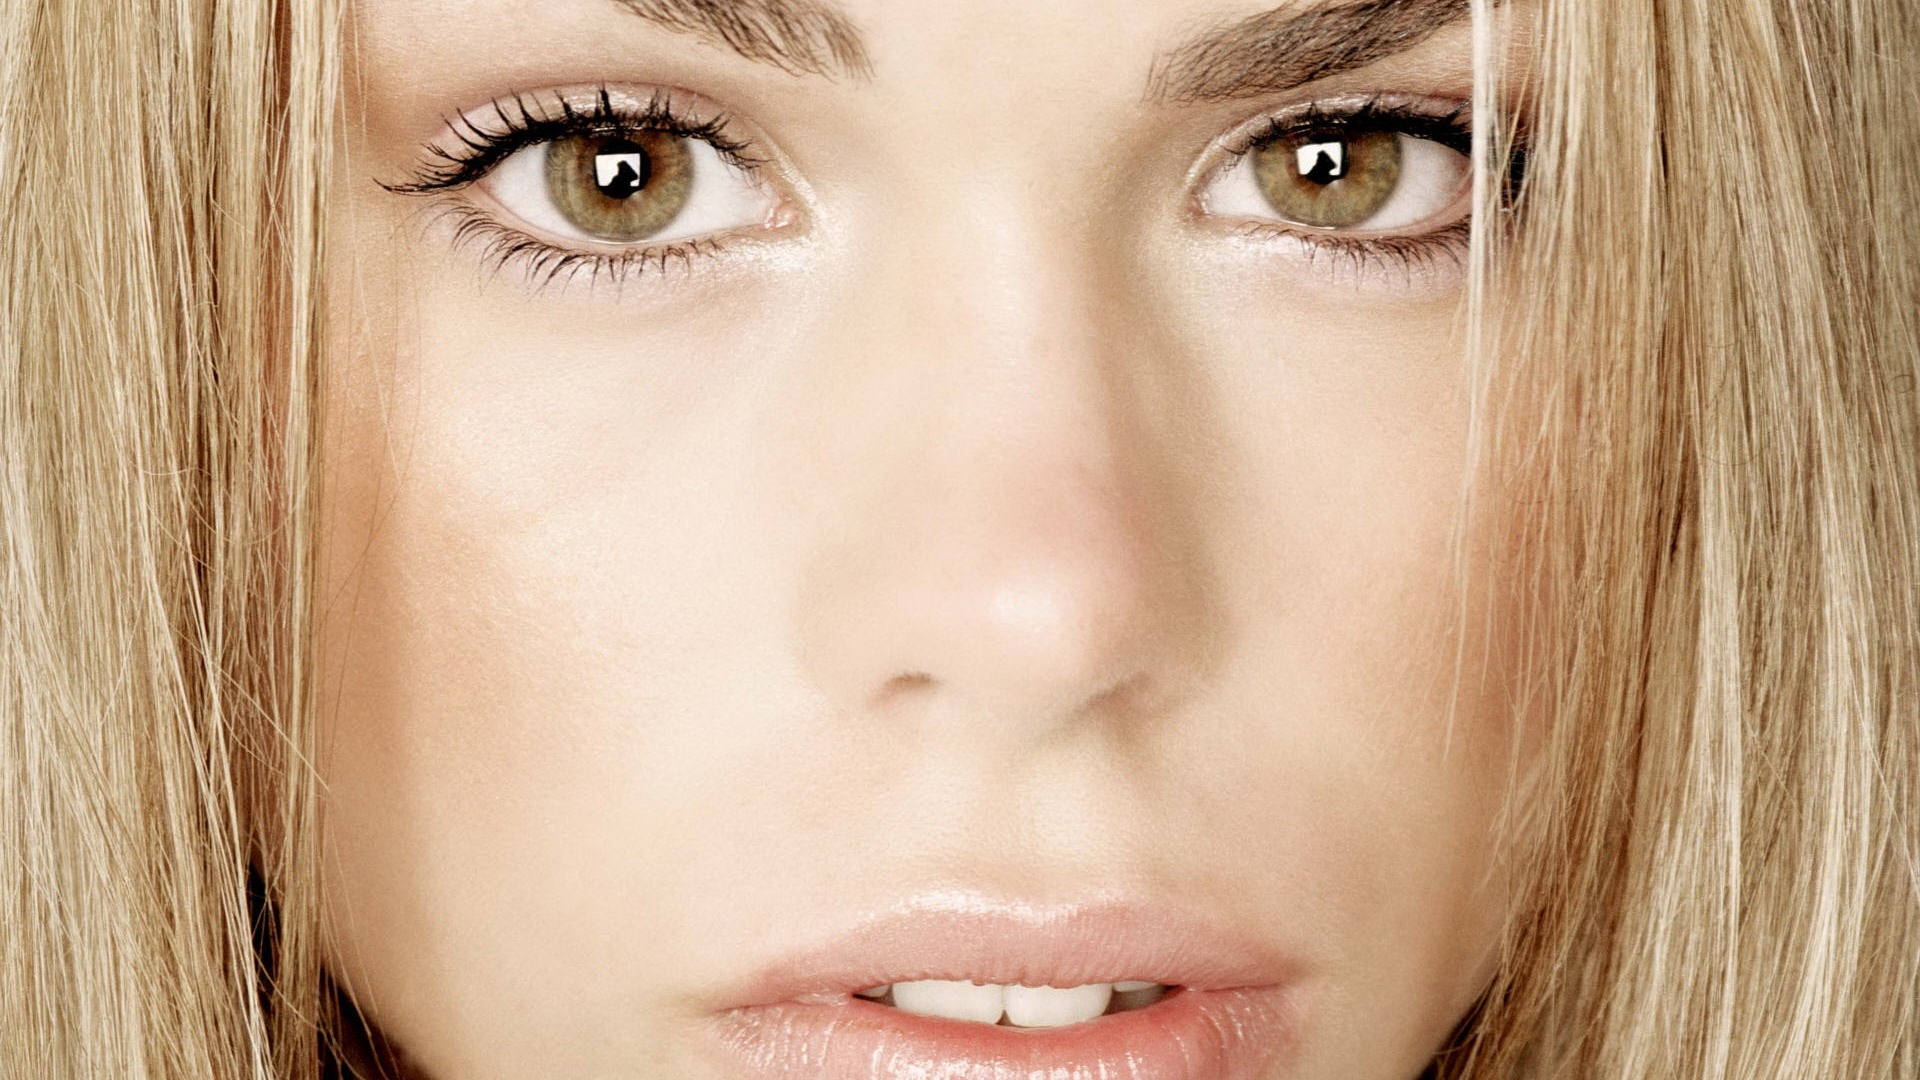 Billie Piper #015 - 1920x1080 Wallpapers Pictures Photos Images